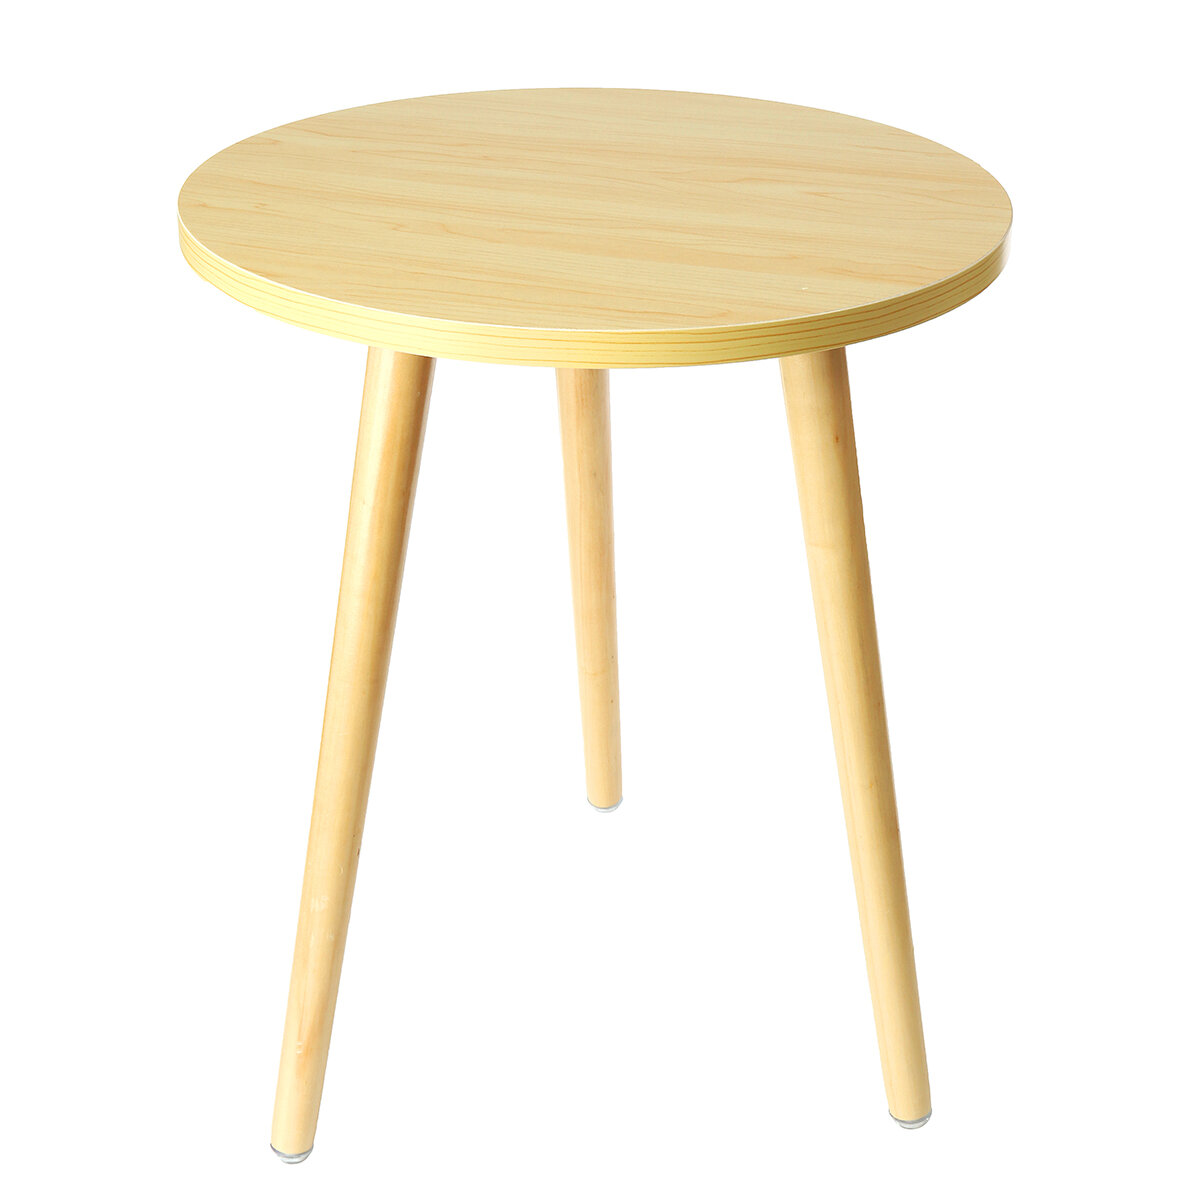 Round Side End Table Wooden Coffee Desk Laptop Desk Round Display Stand Sofaside End Lamp Table for Living Room Bedroom